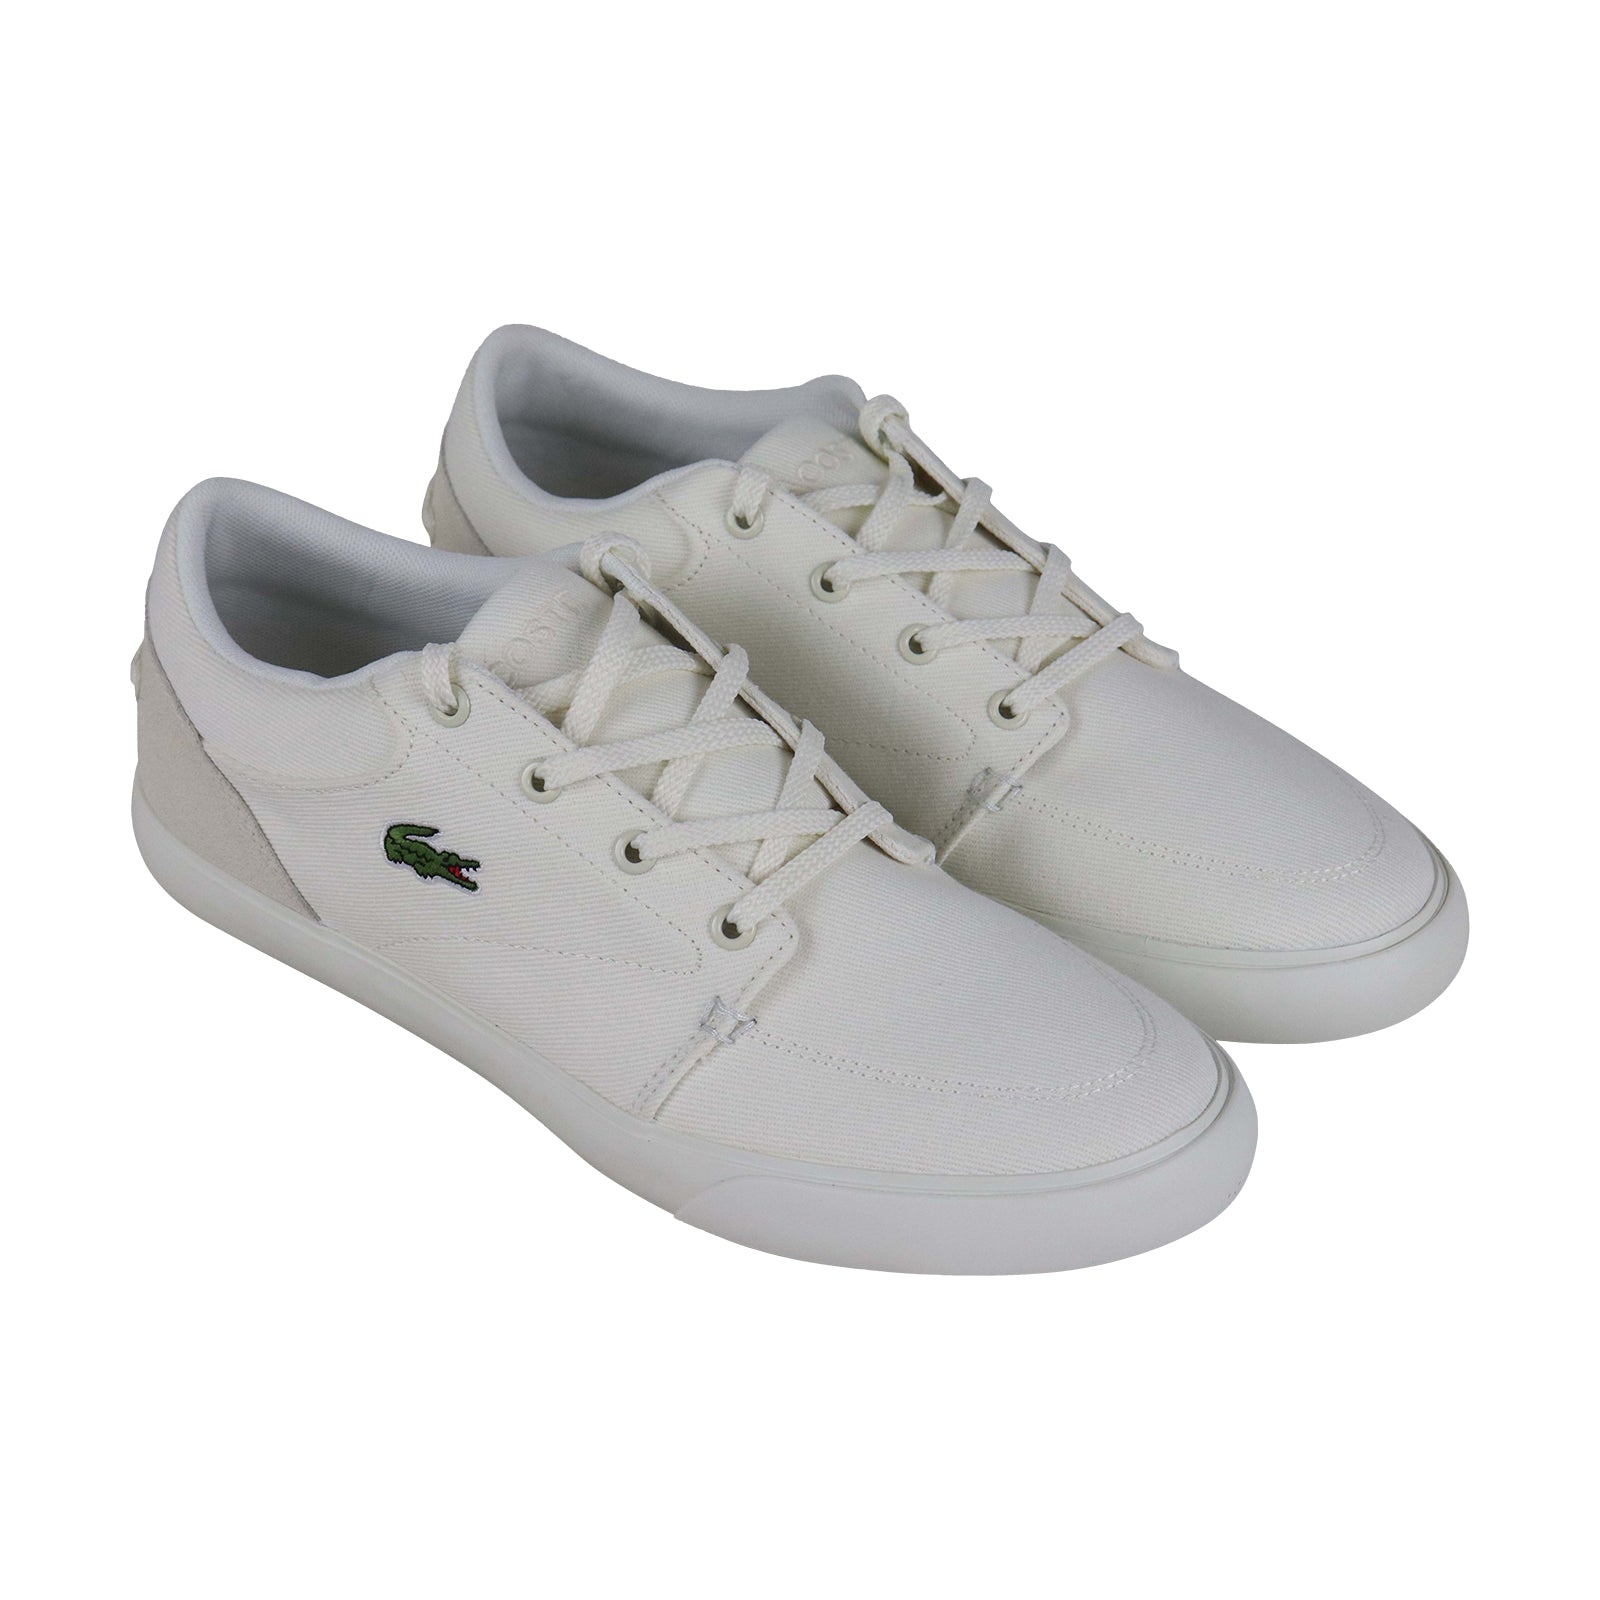 Lacoste Bayliss 219 1 Cma Mens White Canvas Casual Lifestyle Sneakers ...